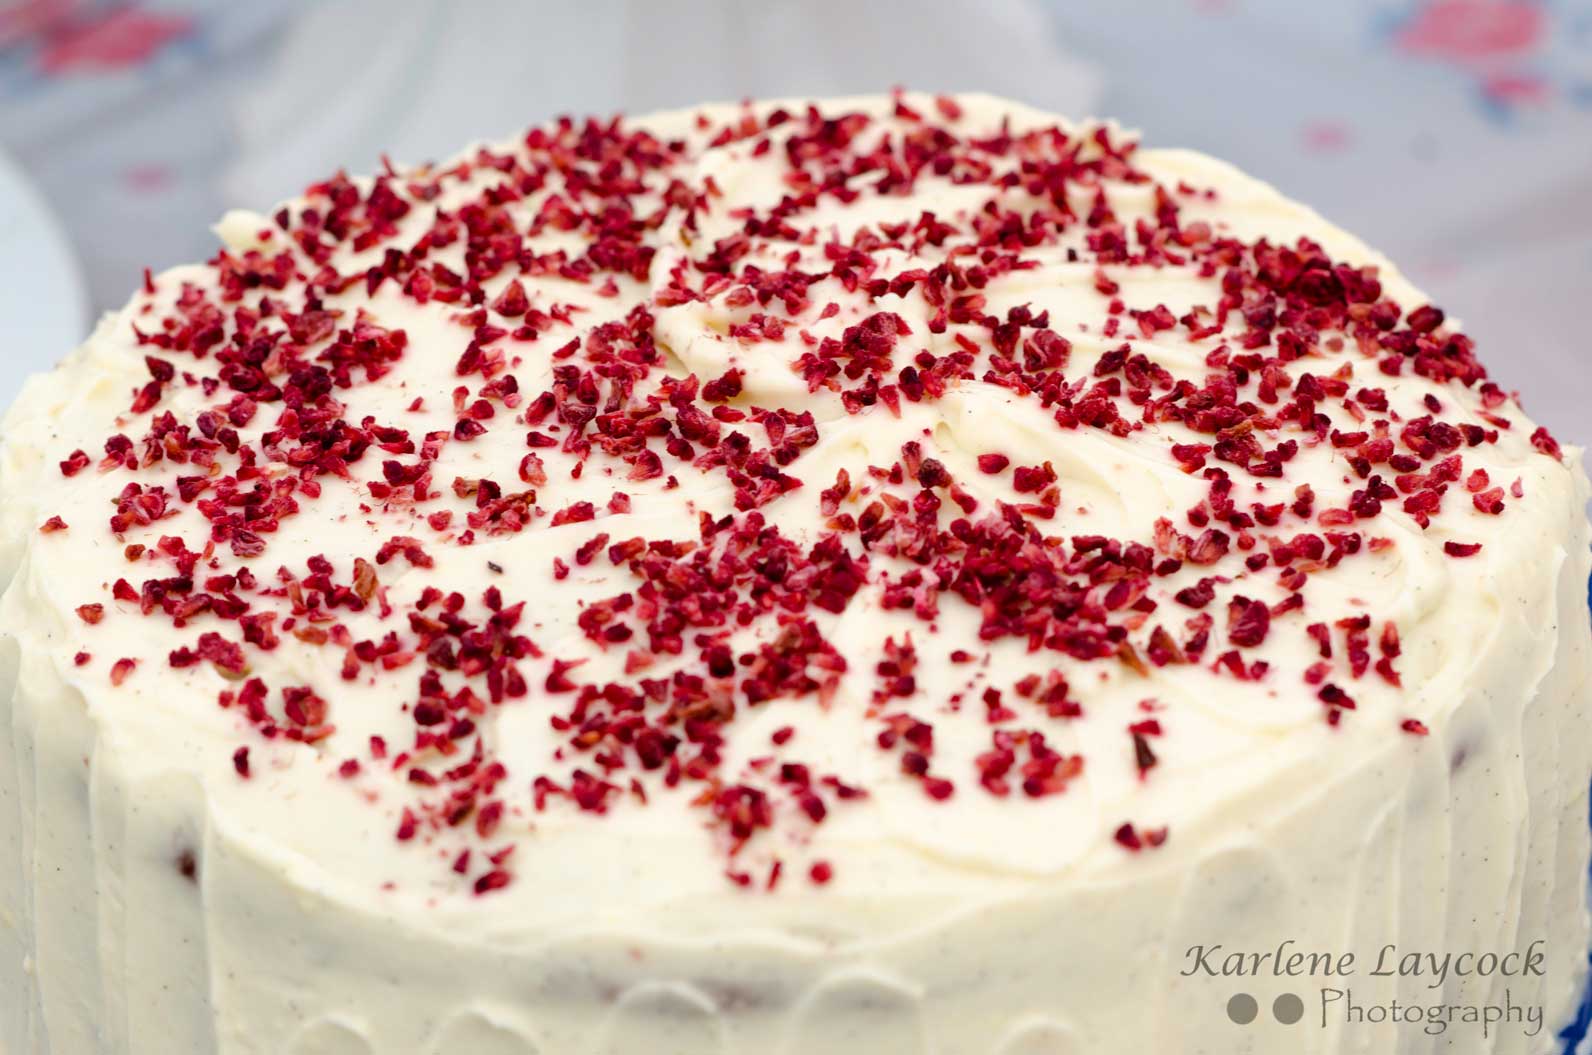 Photograph of a Celebration Cake topped with Red Sprinkles entered into a Local Bake Off Event